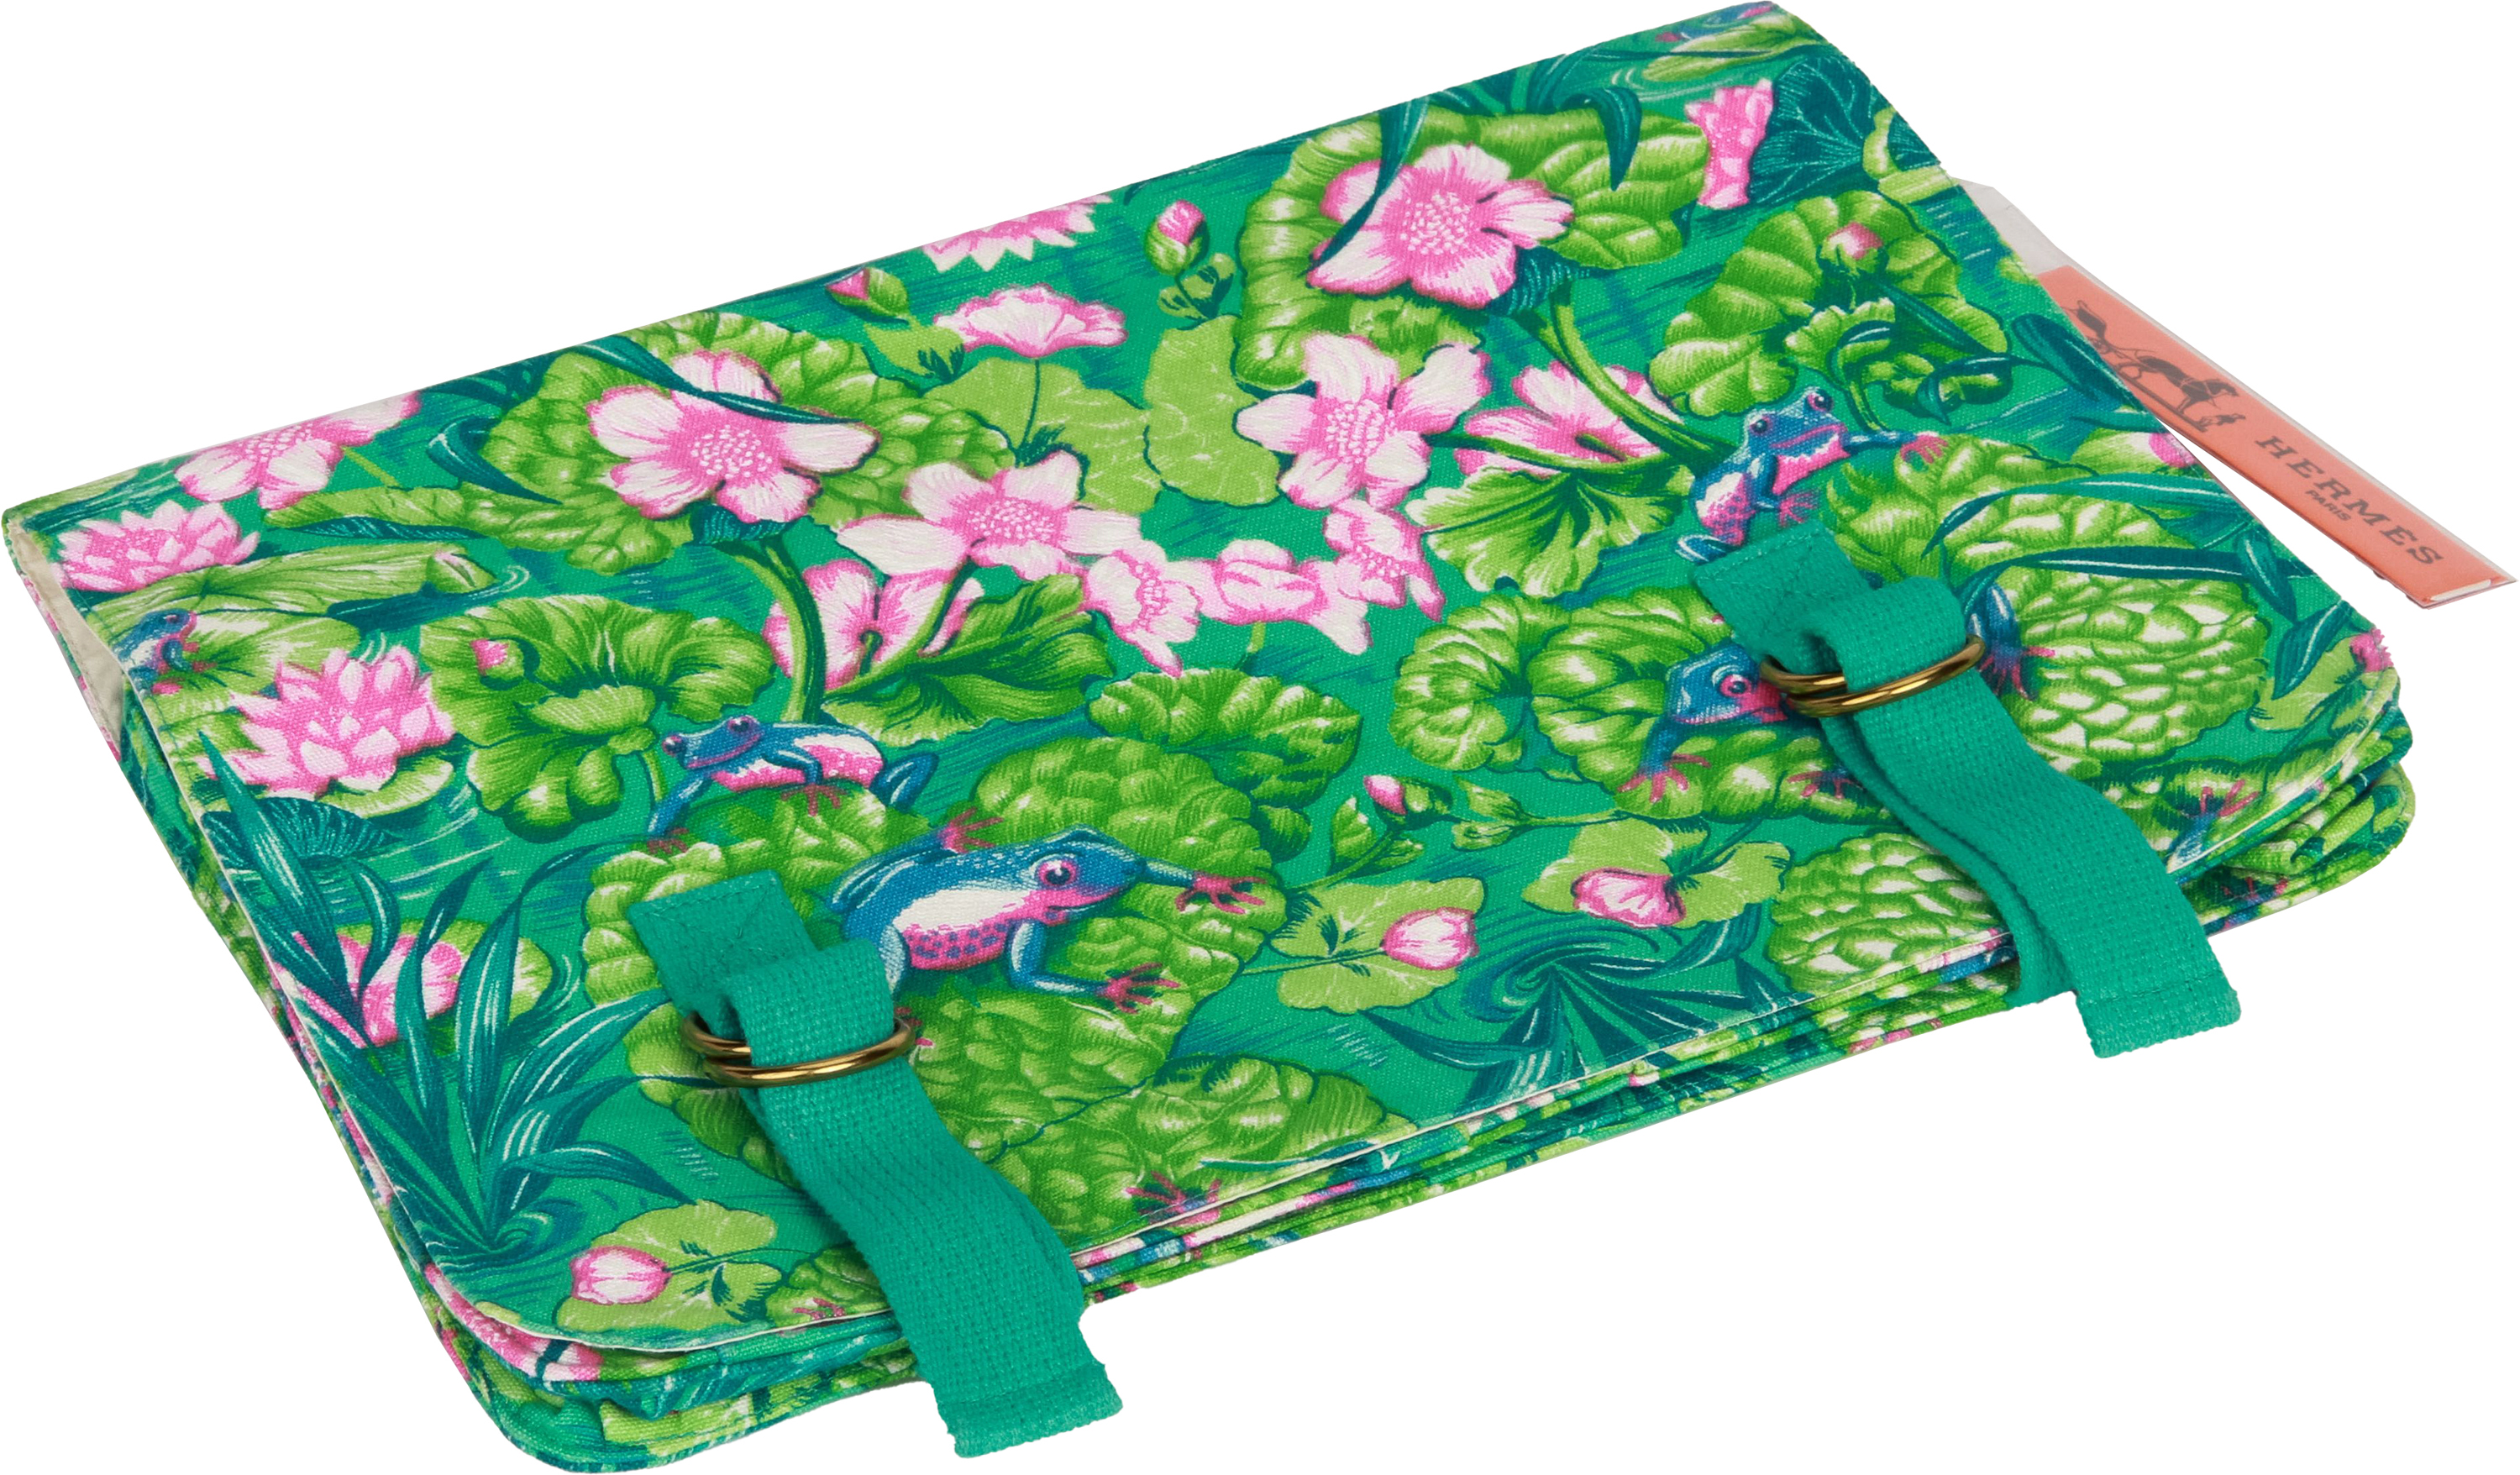 Hermes Vintage Frogs Toile Green Clutch~P77634328